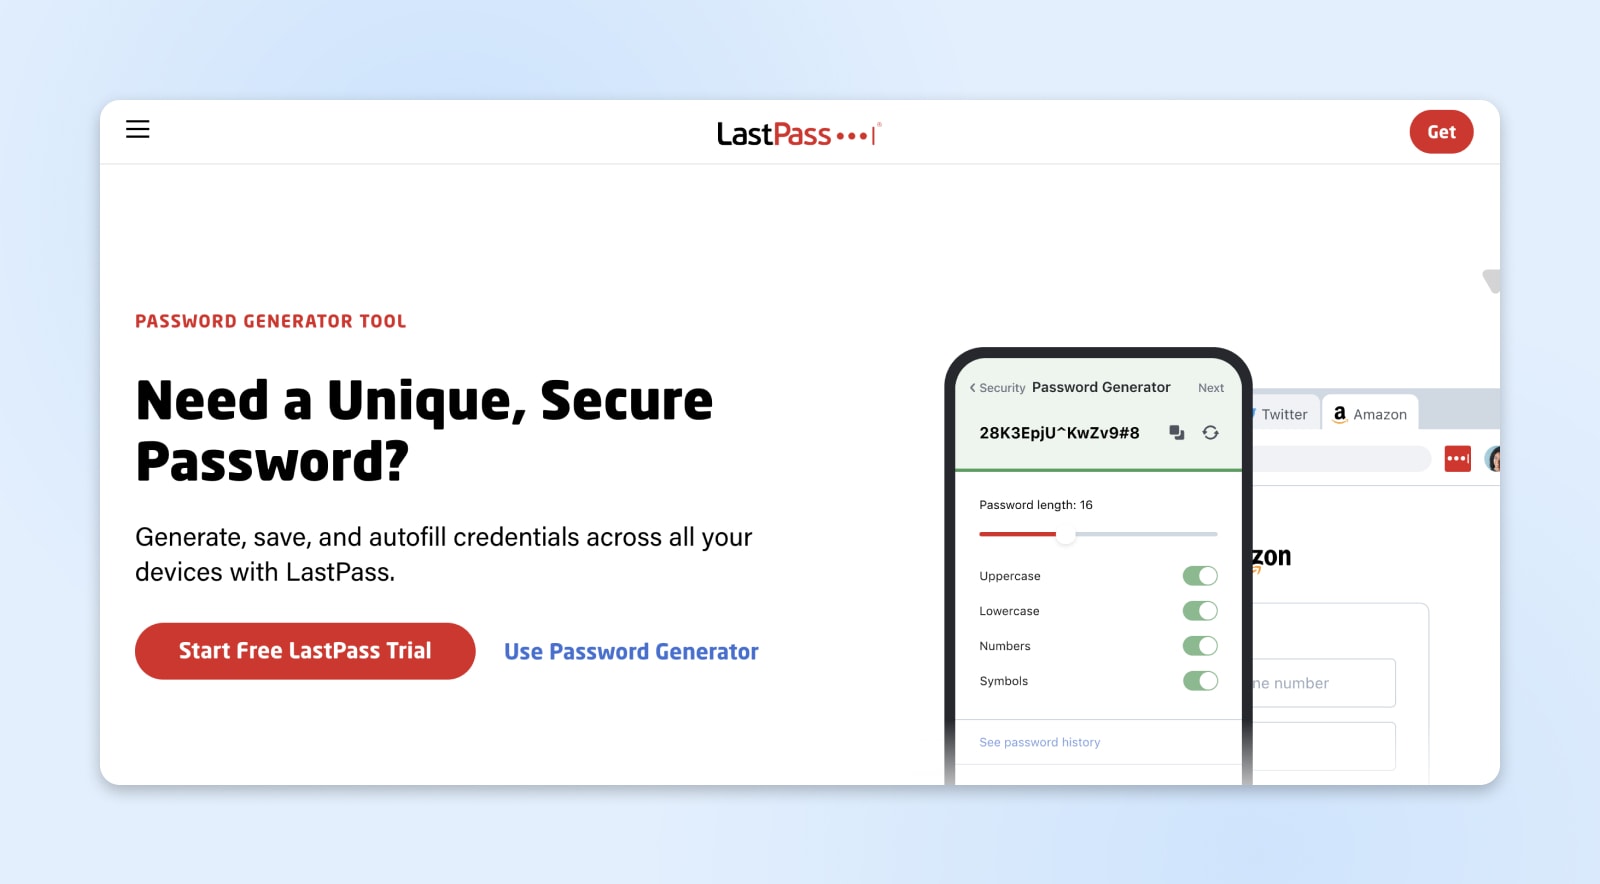 The top portion of the LastPass homepage asks "Need a Unique, Secure Password?" in black font on a white background